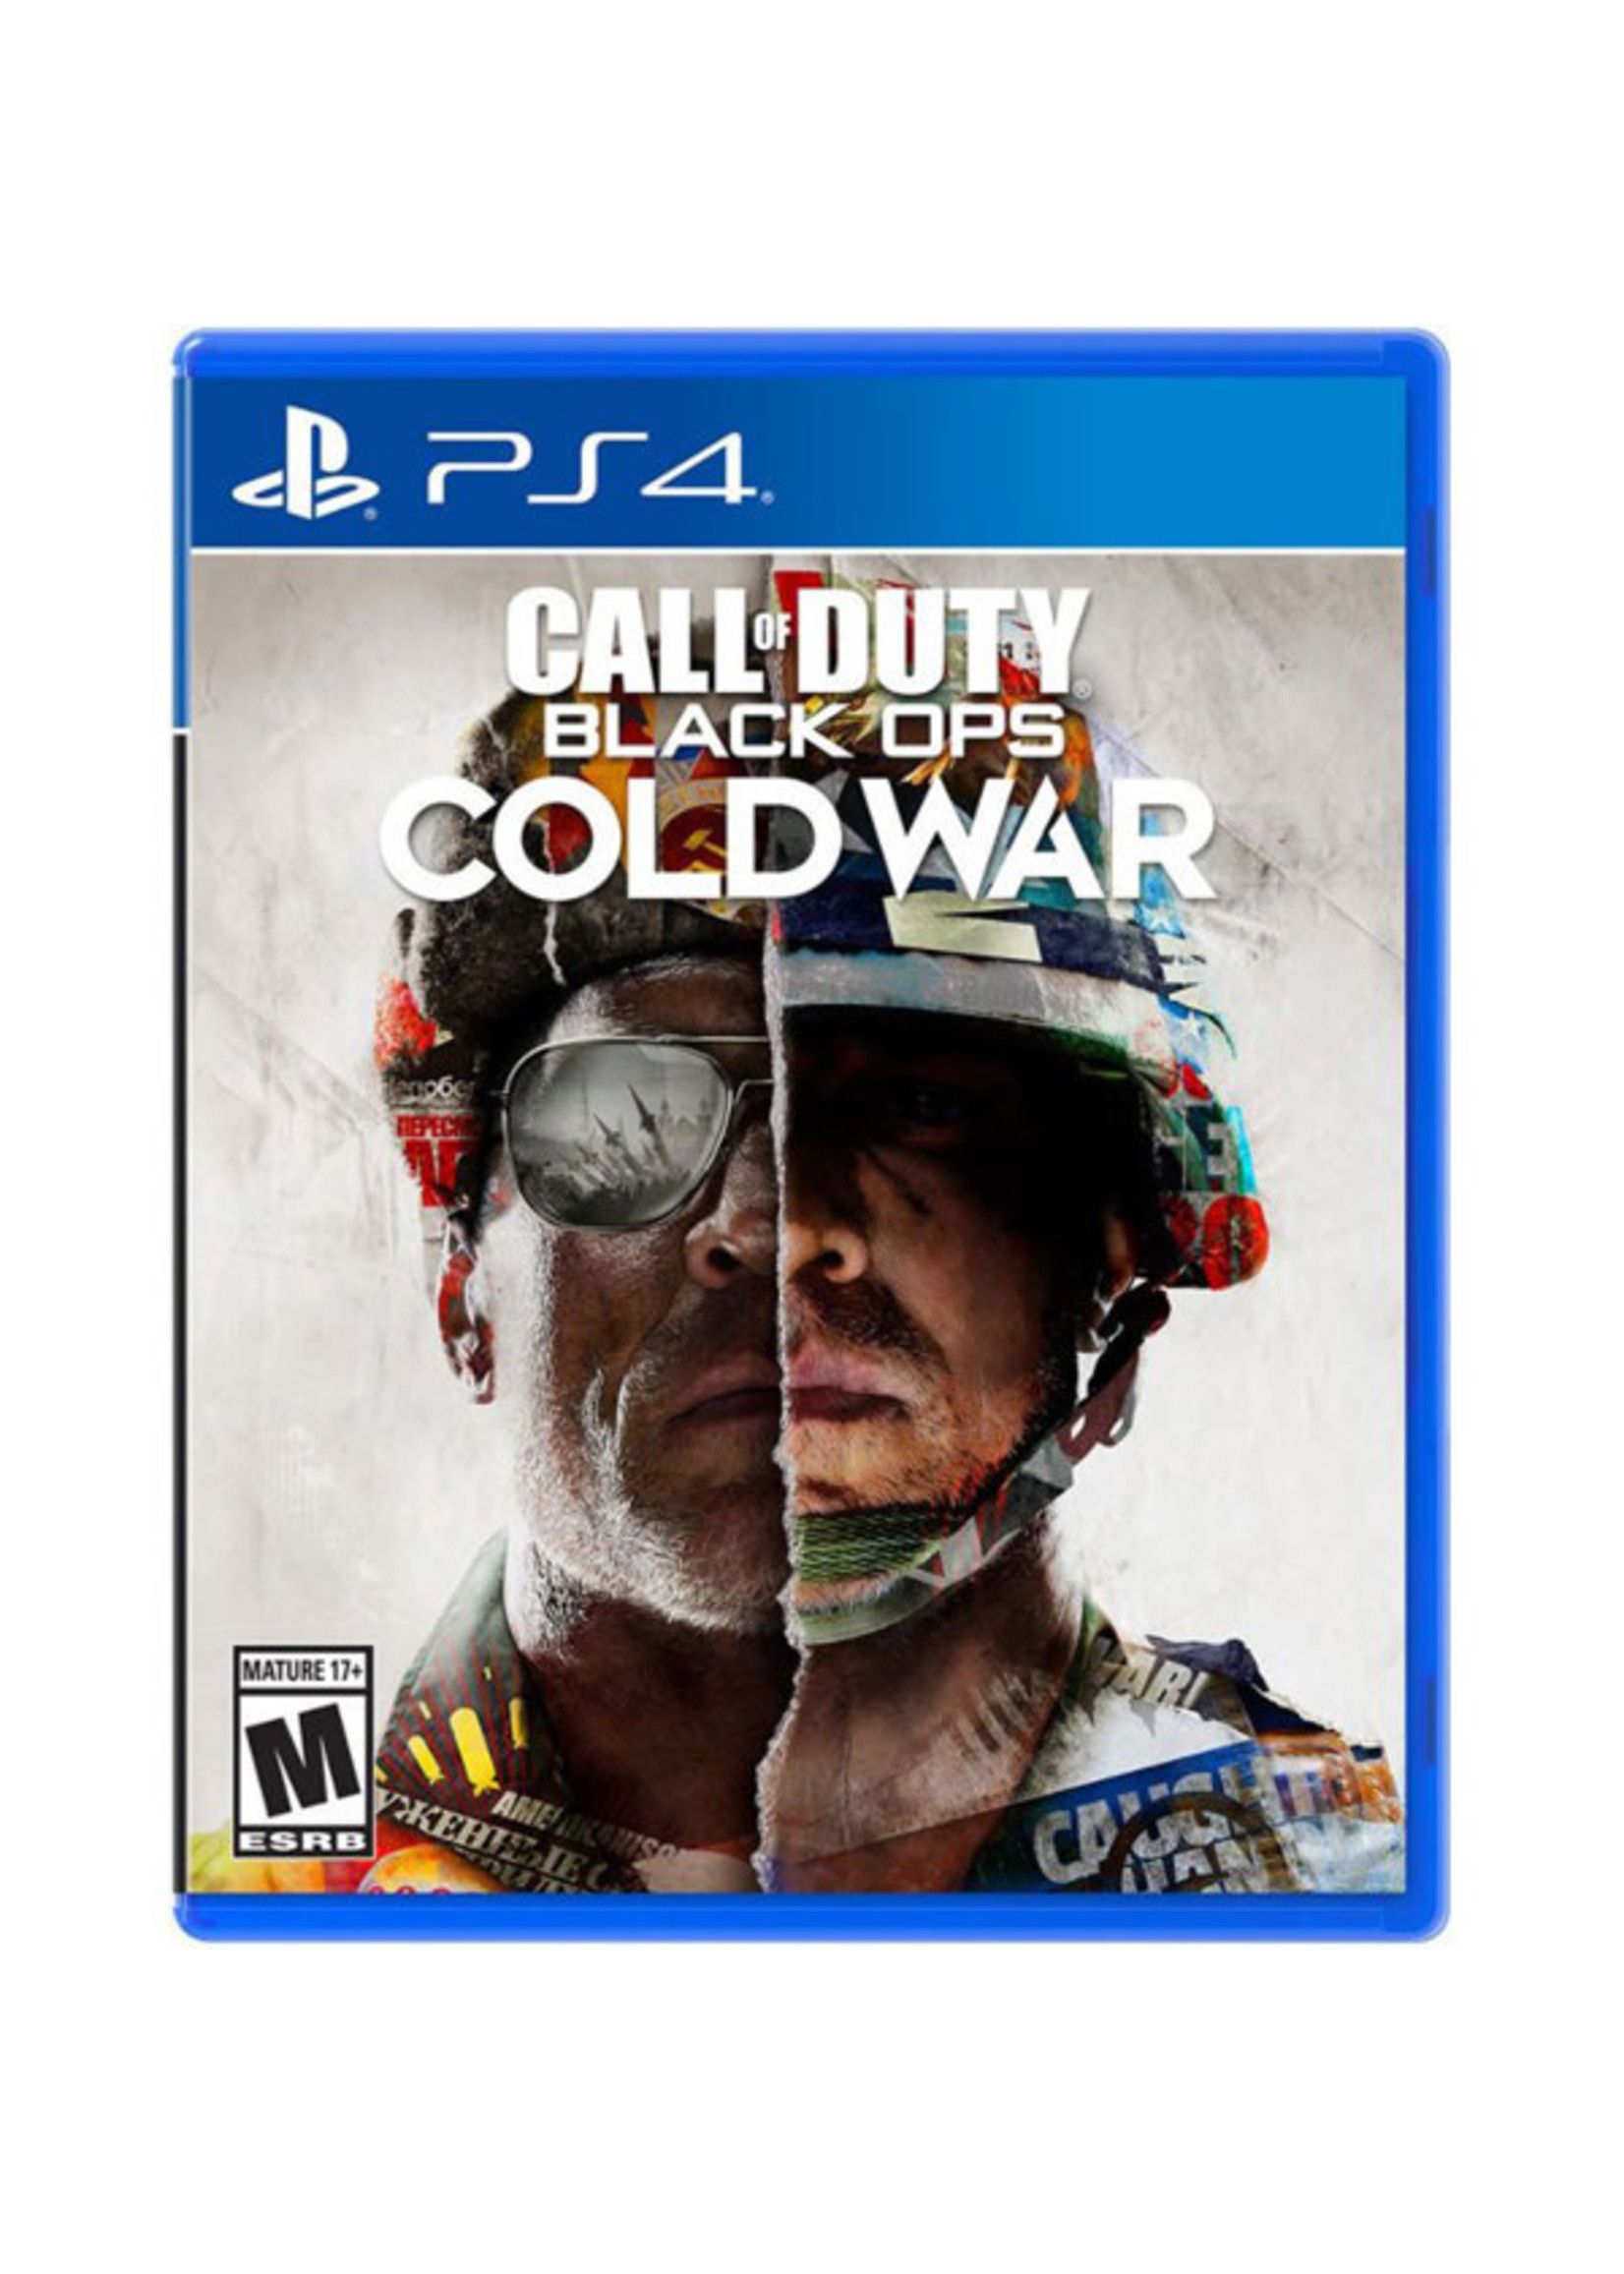 CALL OF DUTY BLACK OPS COLD WAR PS4 (USAGÉ)